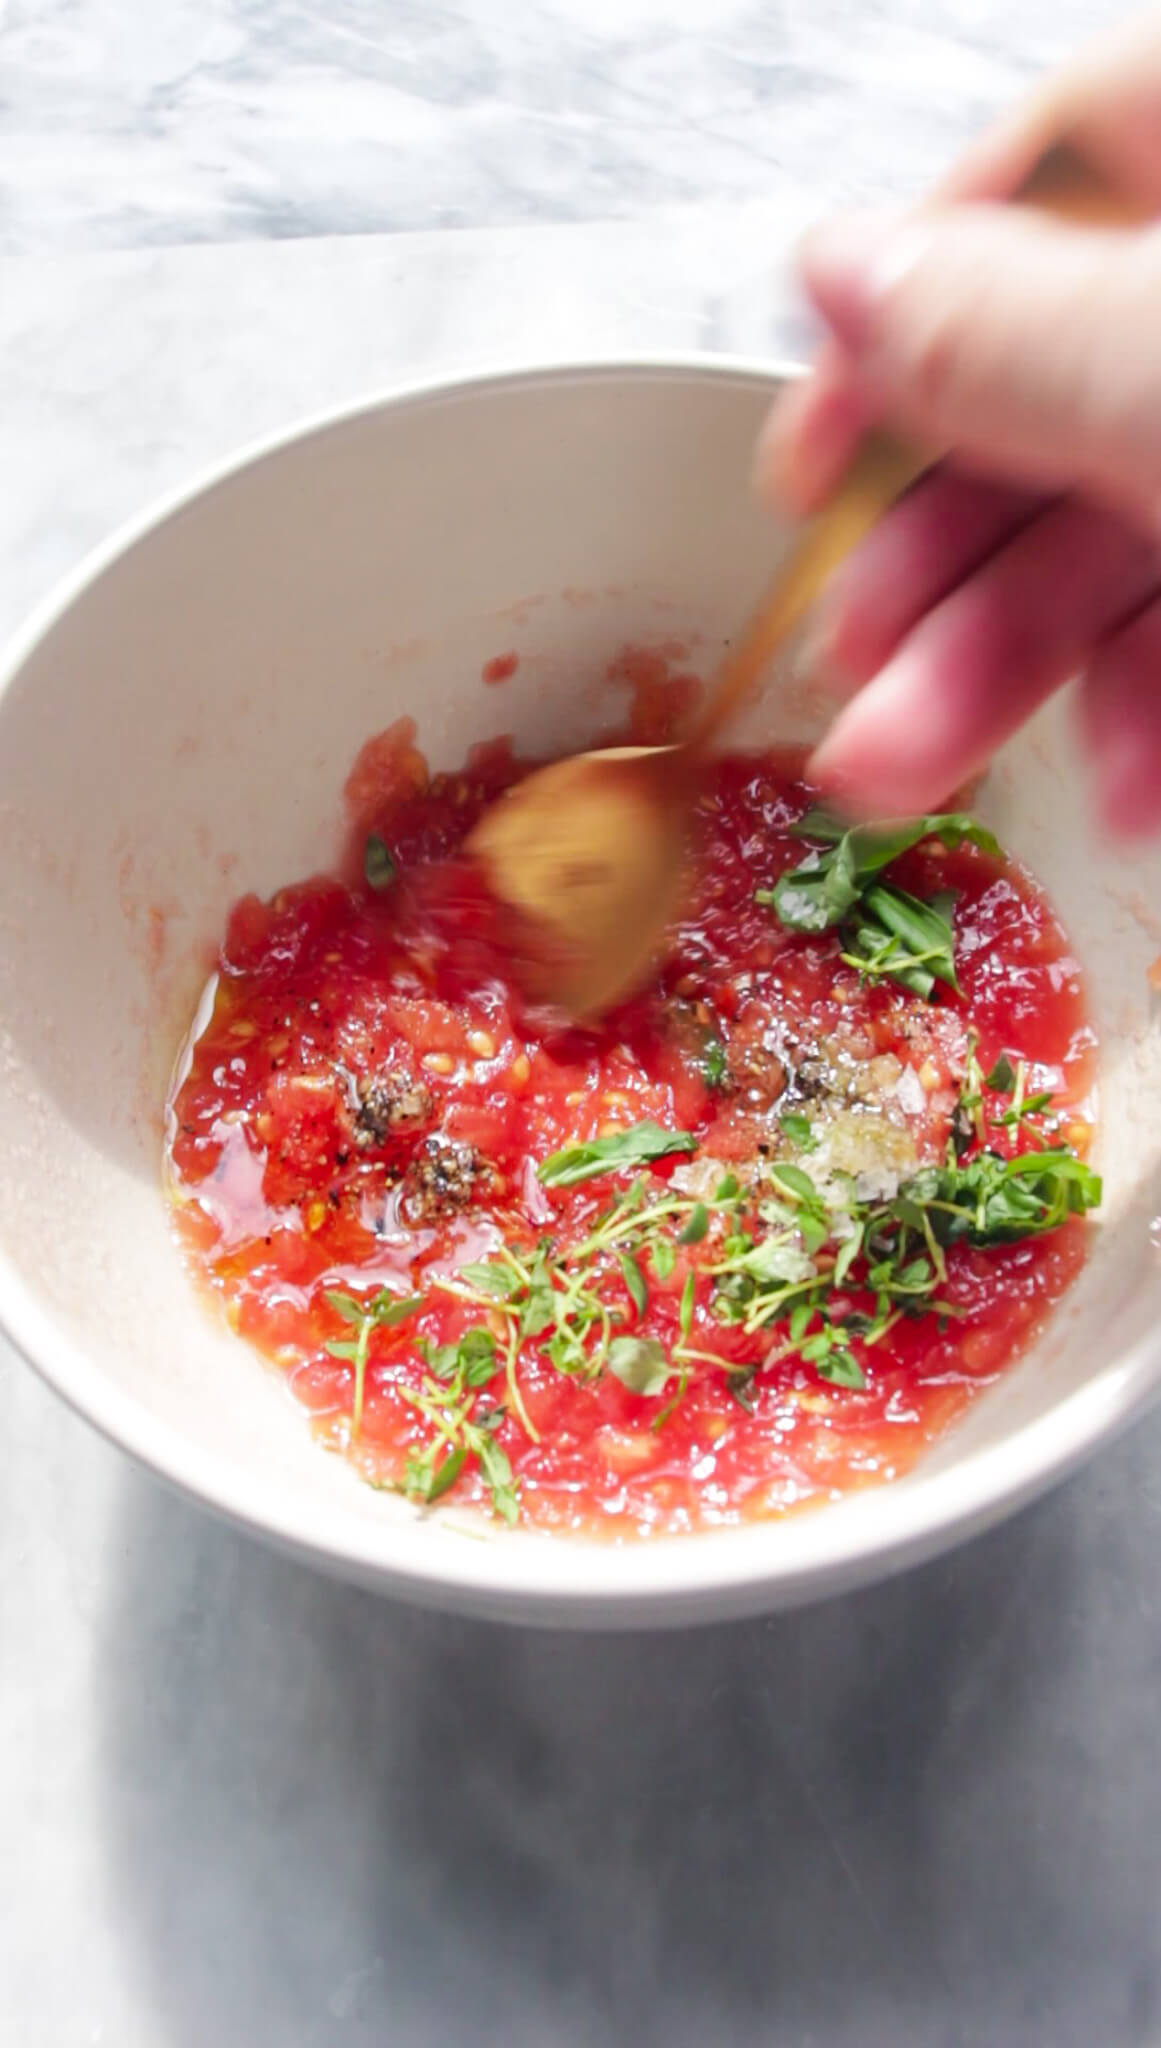 Mixing grated tomatoes, thyme, basil, salt and pepper in a small white bowl.